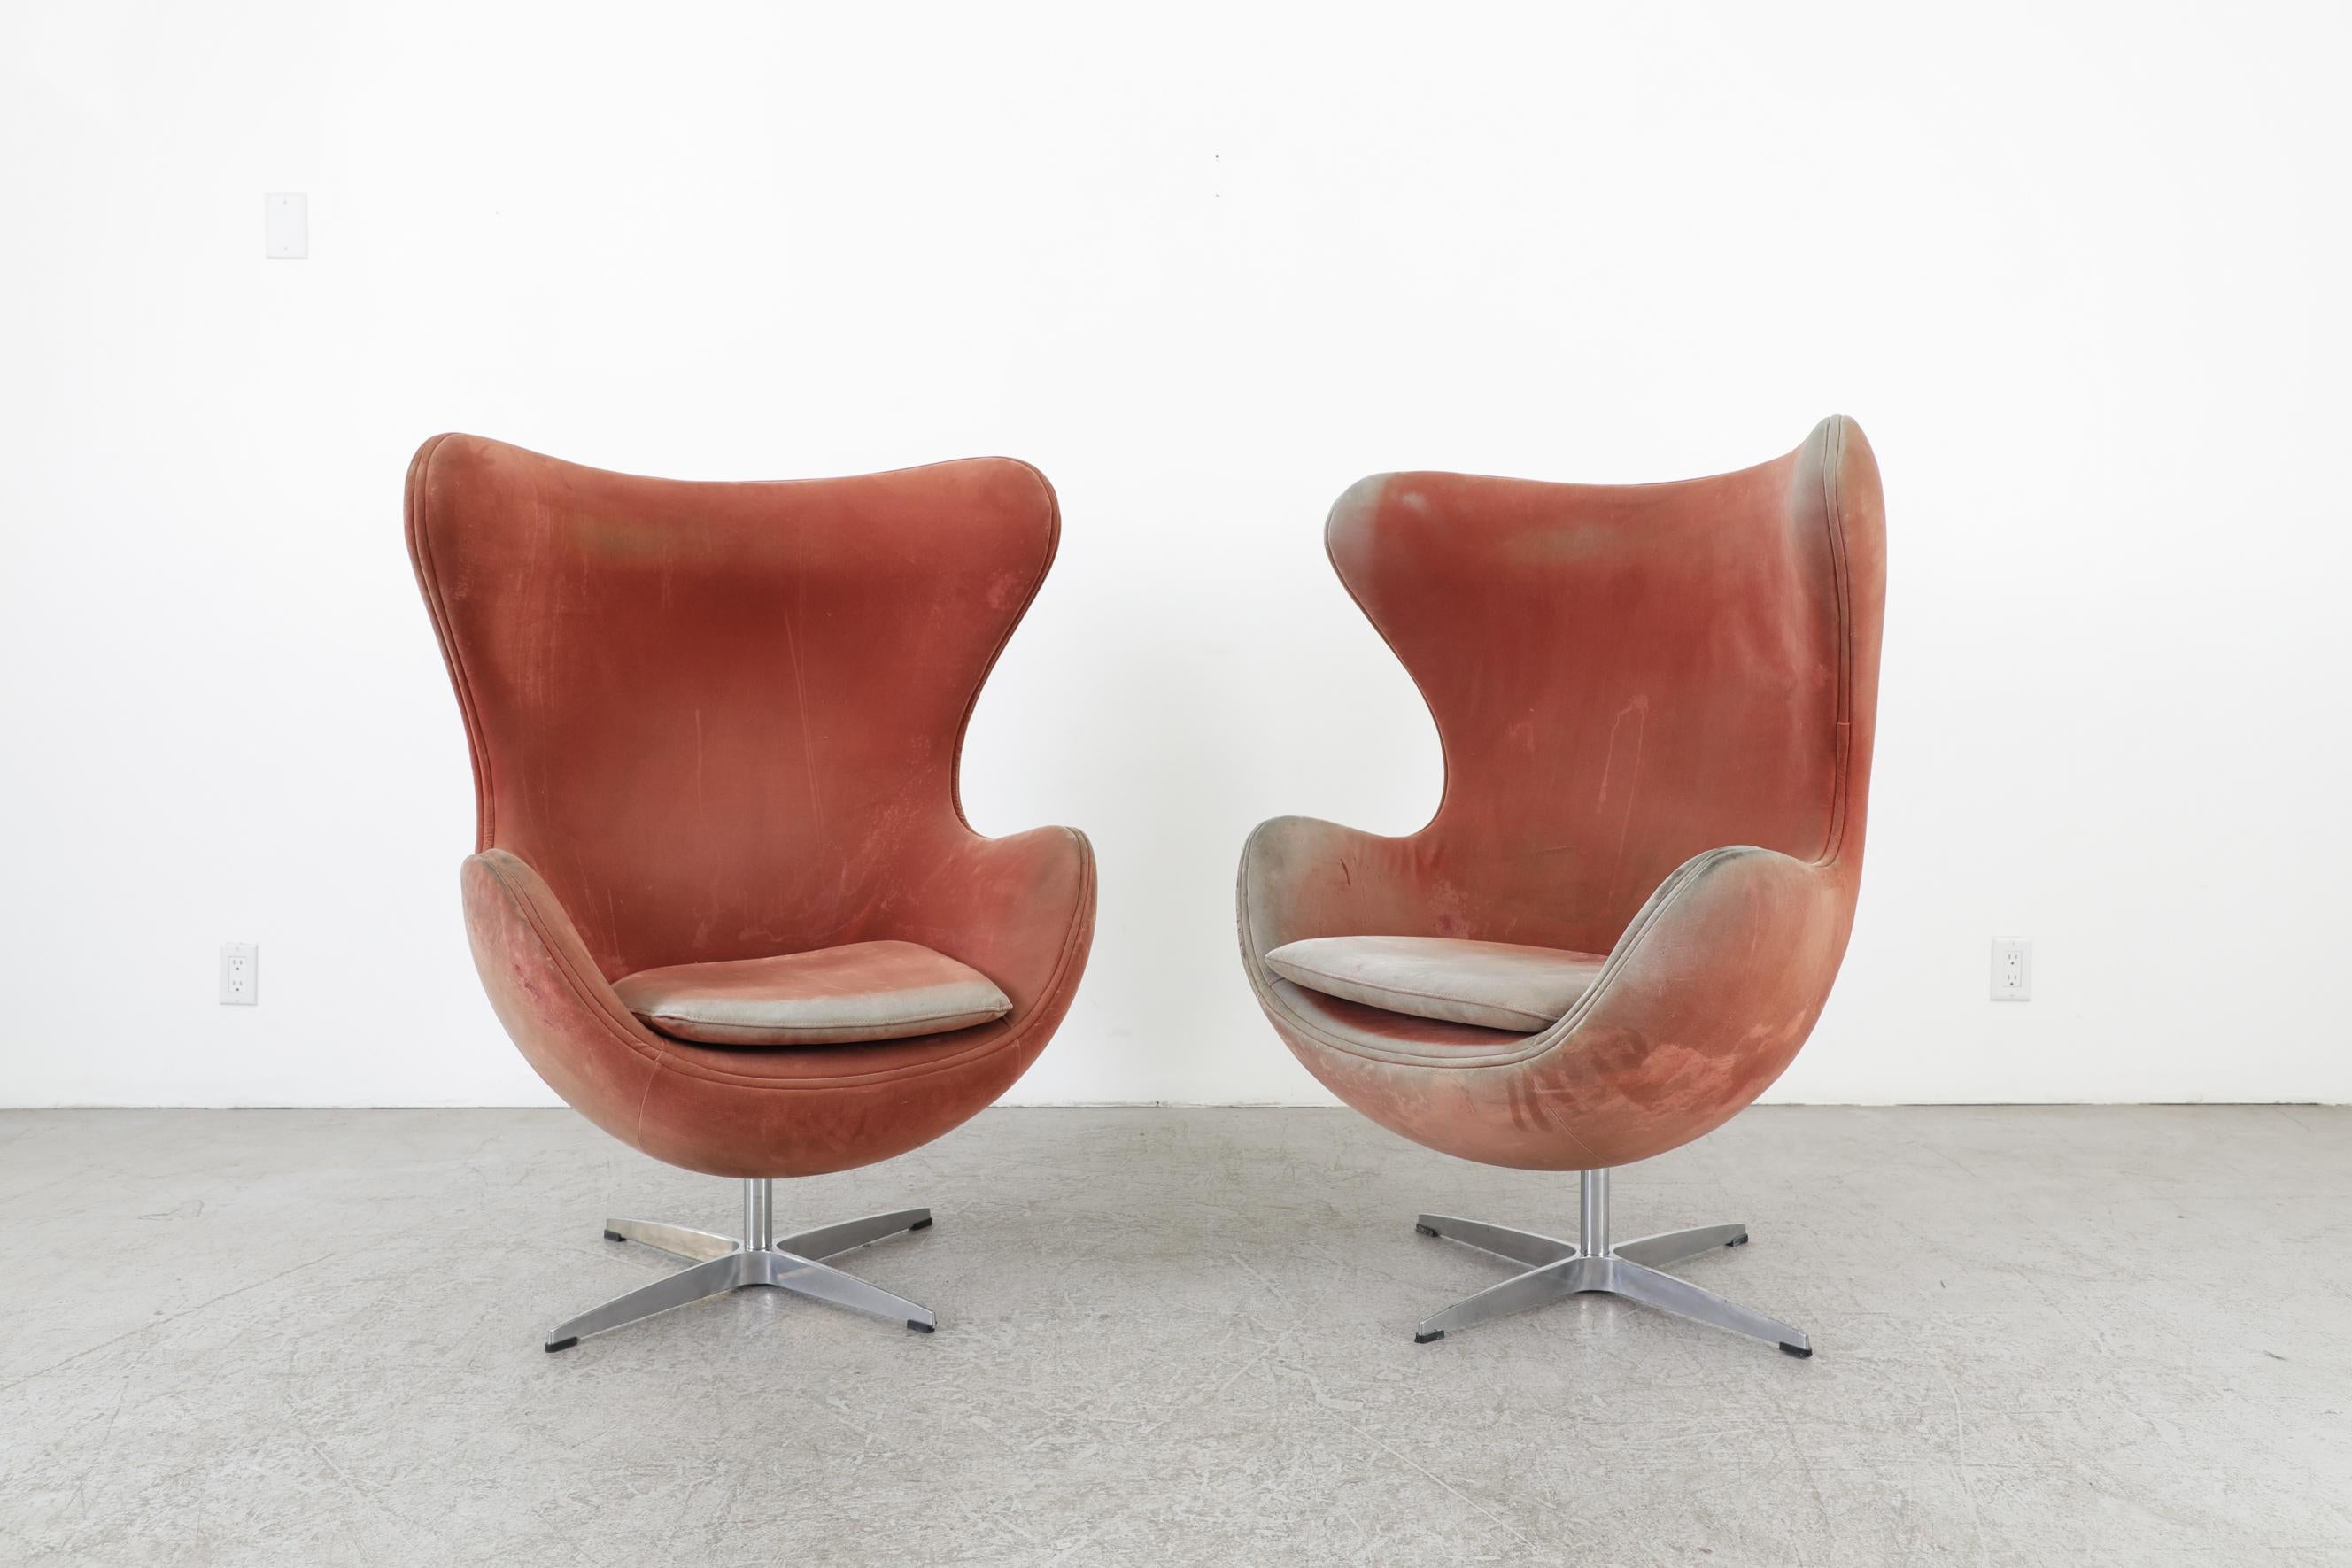 Pair of very original iconic egg chairs by Arne Jacobsen for the SAS Royal Hotel in Copenhagen in 1958. A design that affords privacy in otherwise public spaces, the egg chair is sleek, ergonomic and very stylish. A quintessential mid century